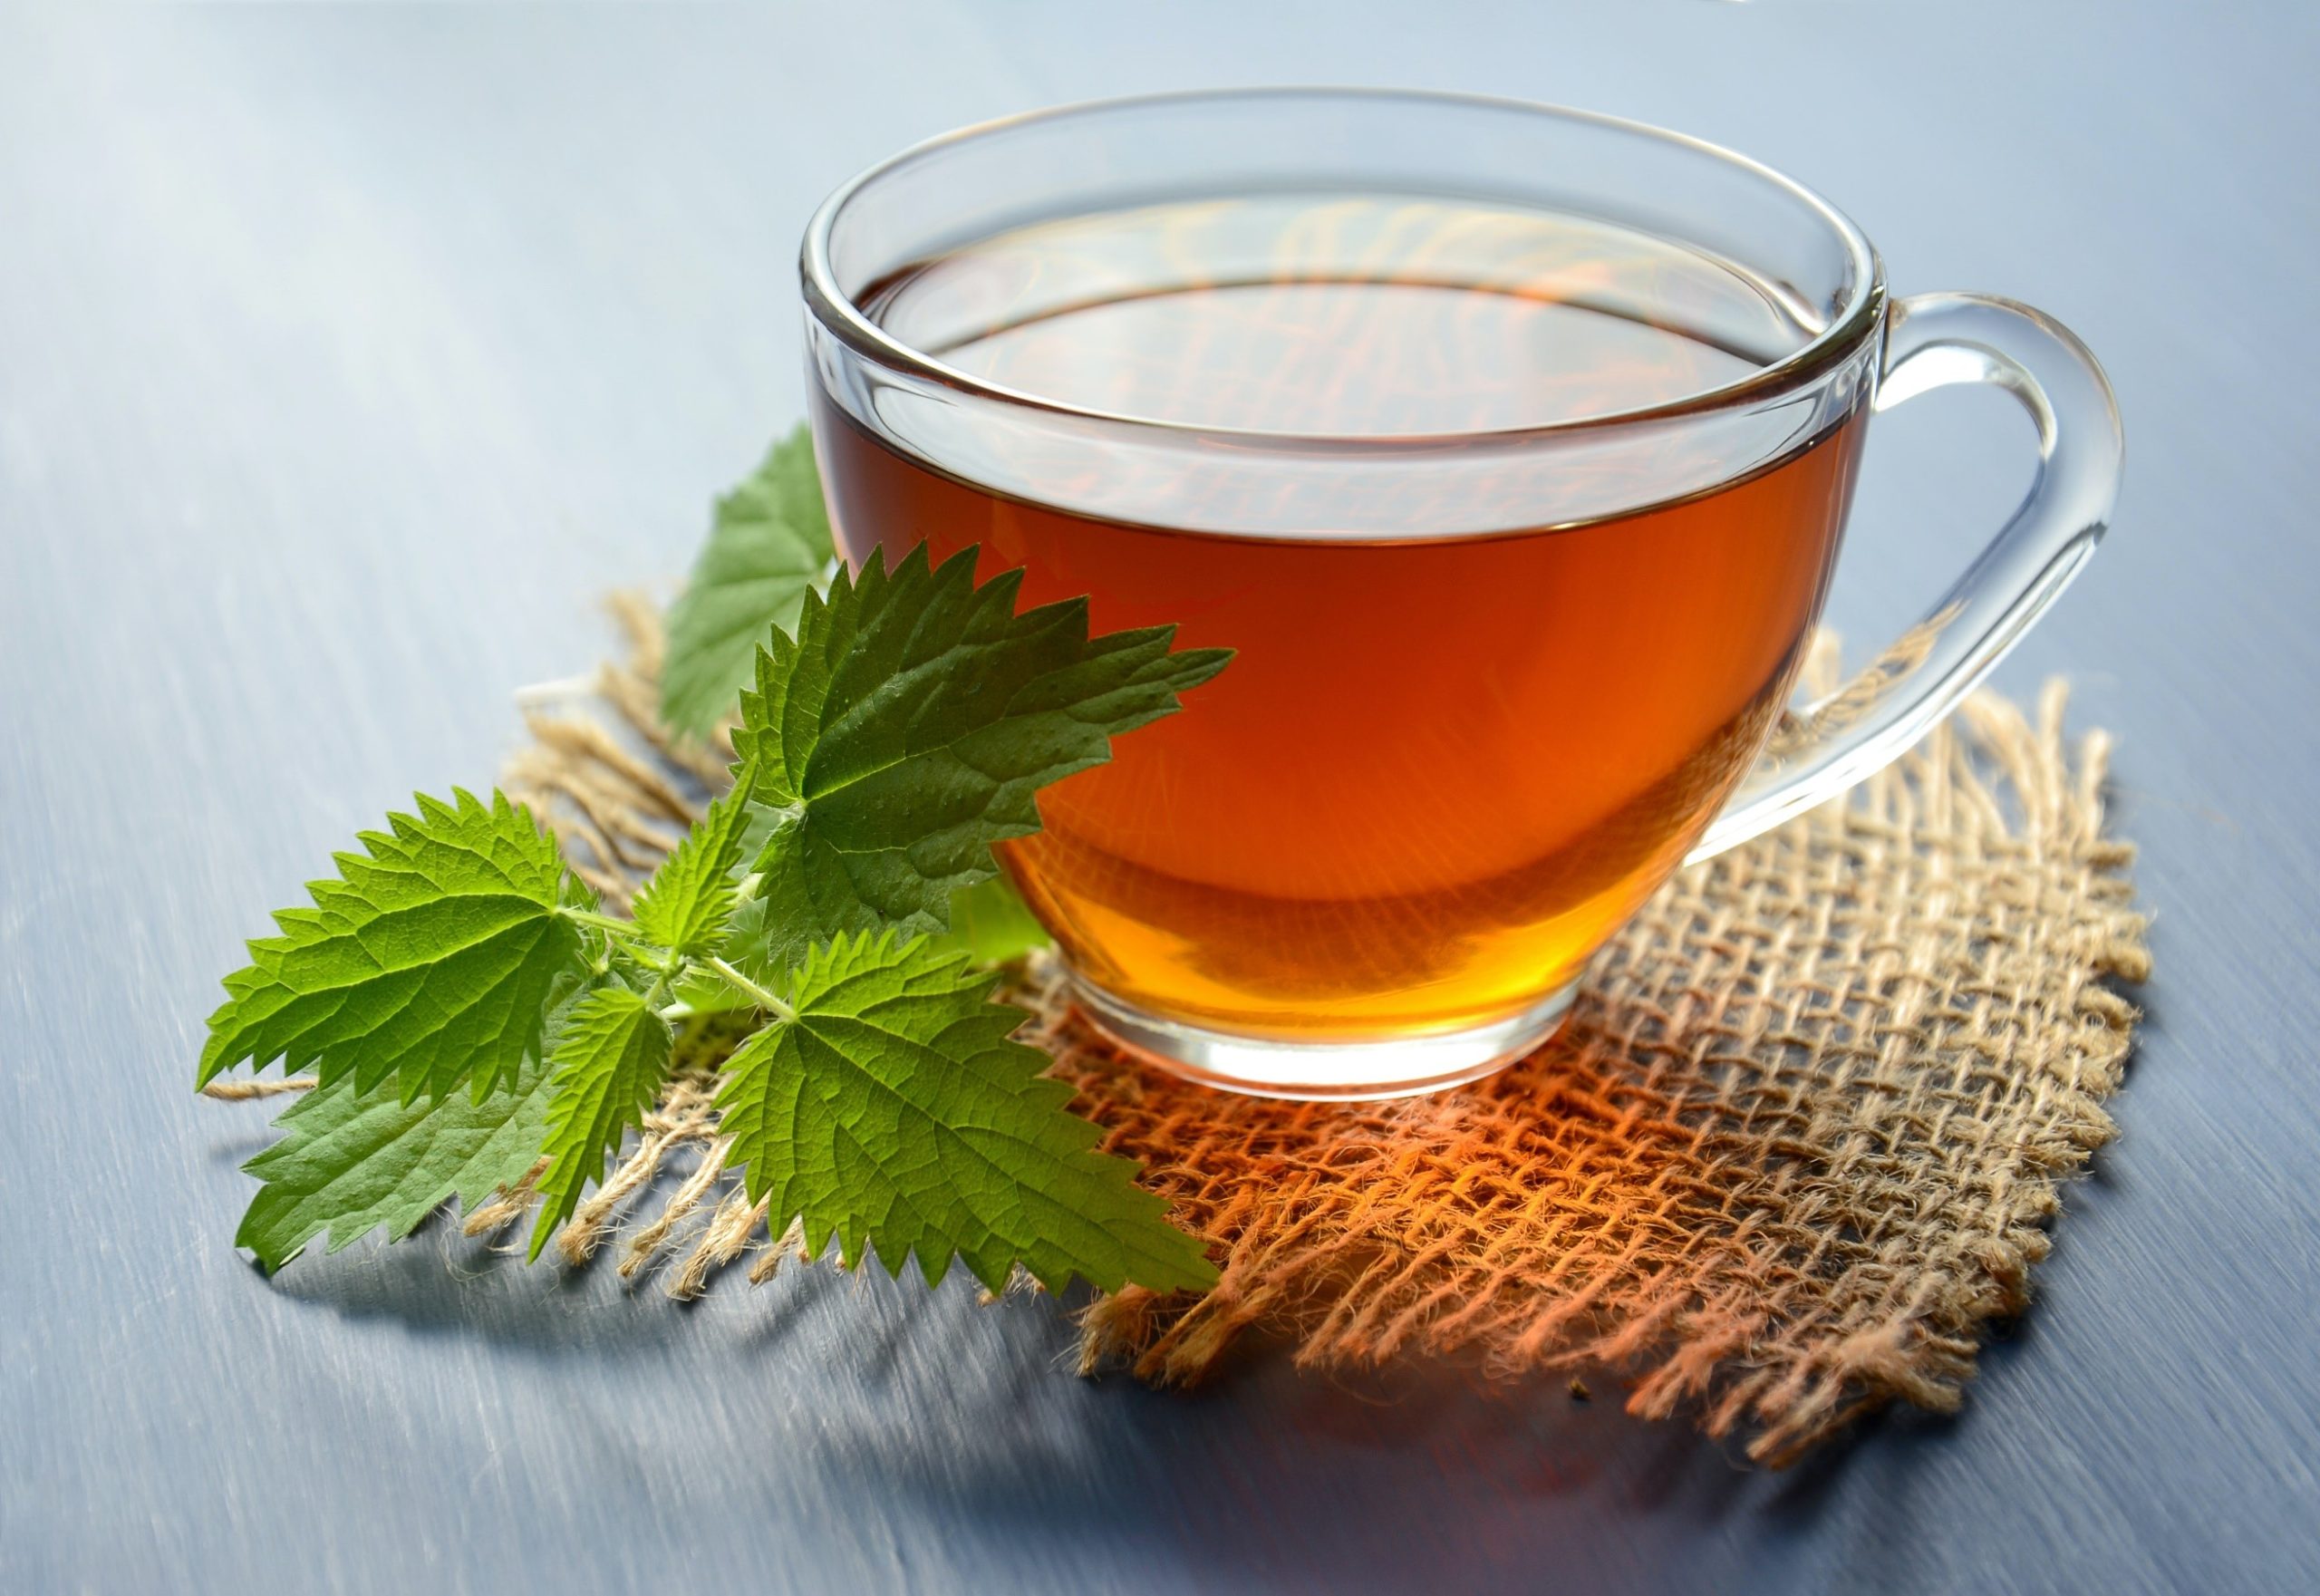 10 herbal teas to help you become a new you in the new year